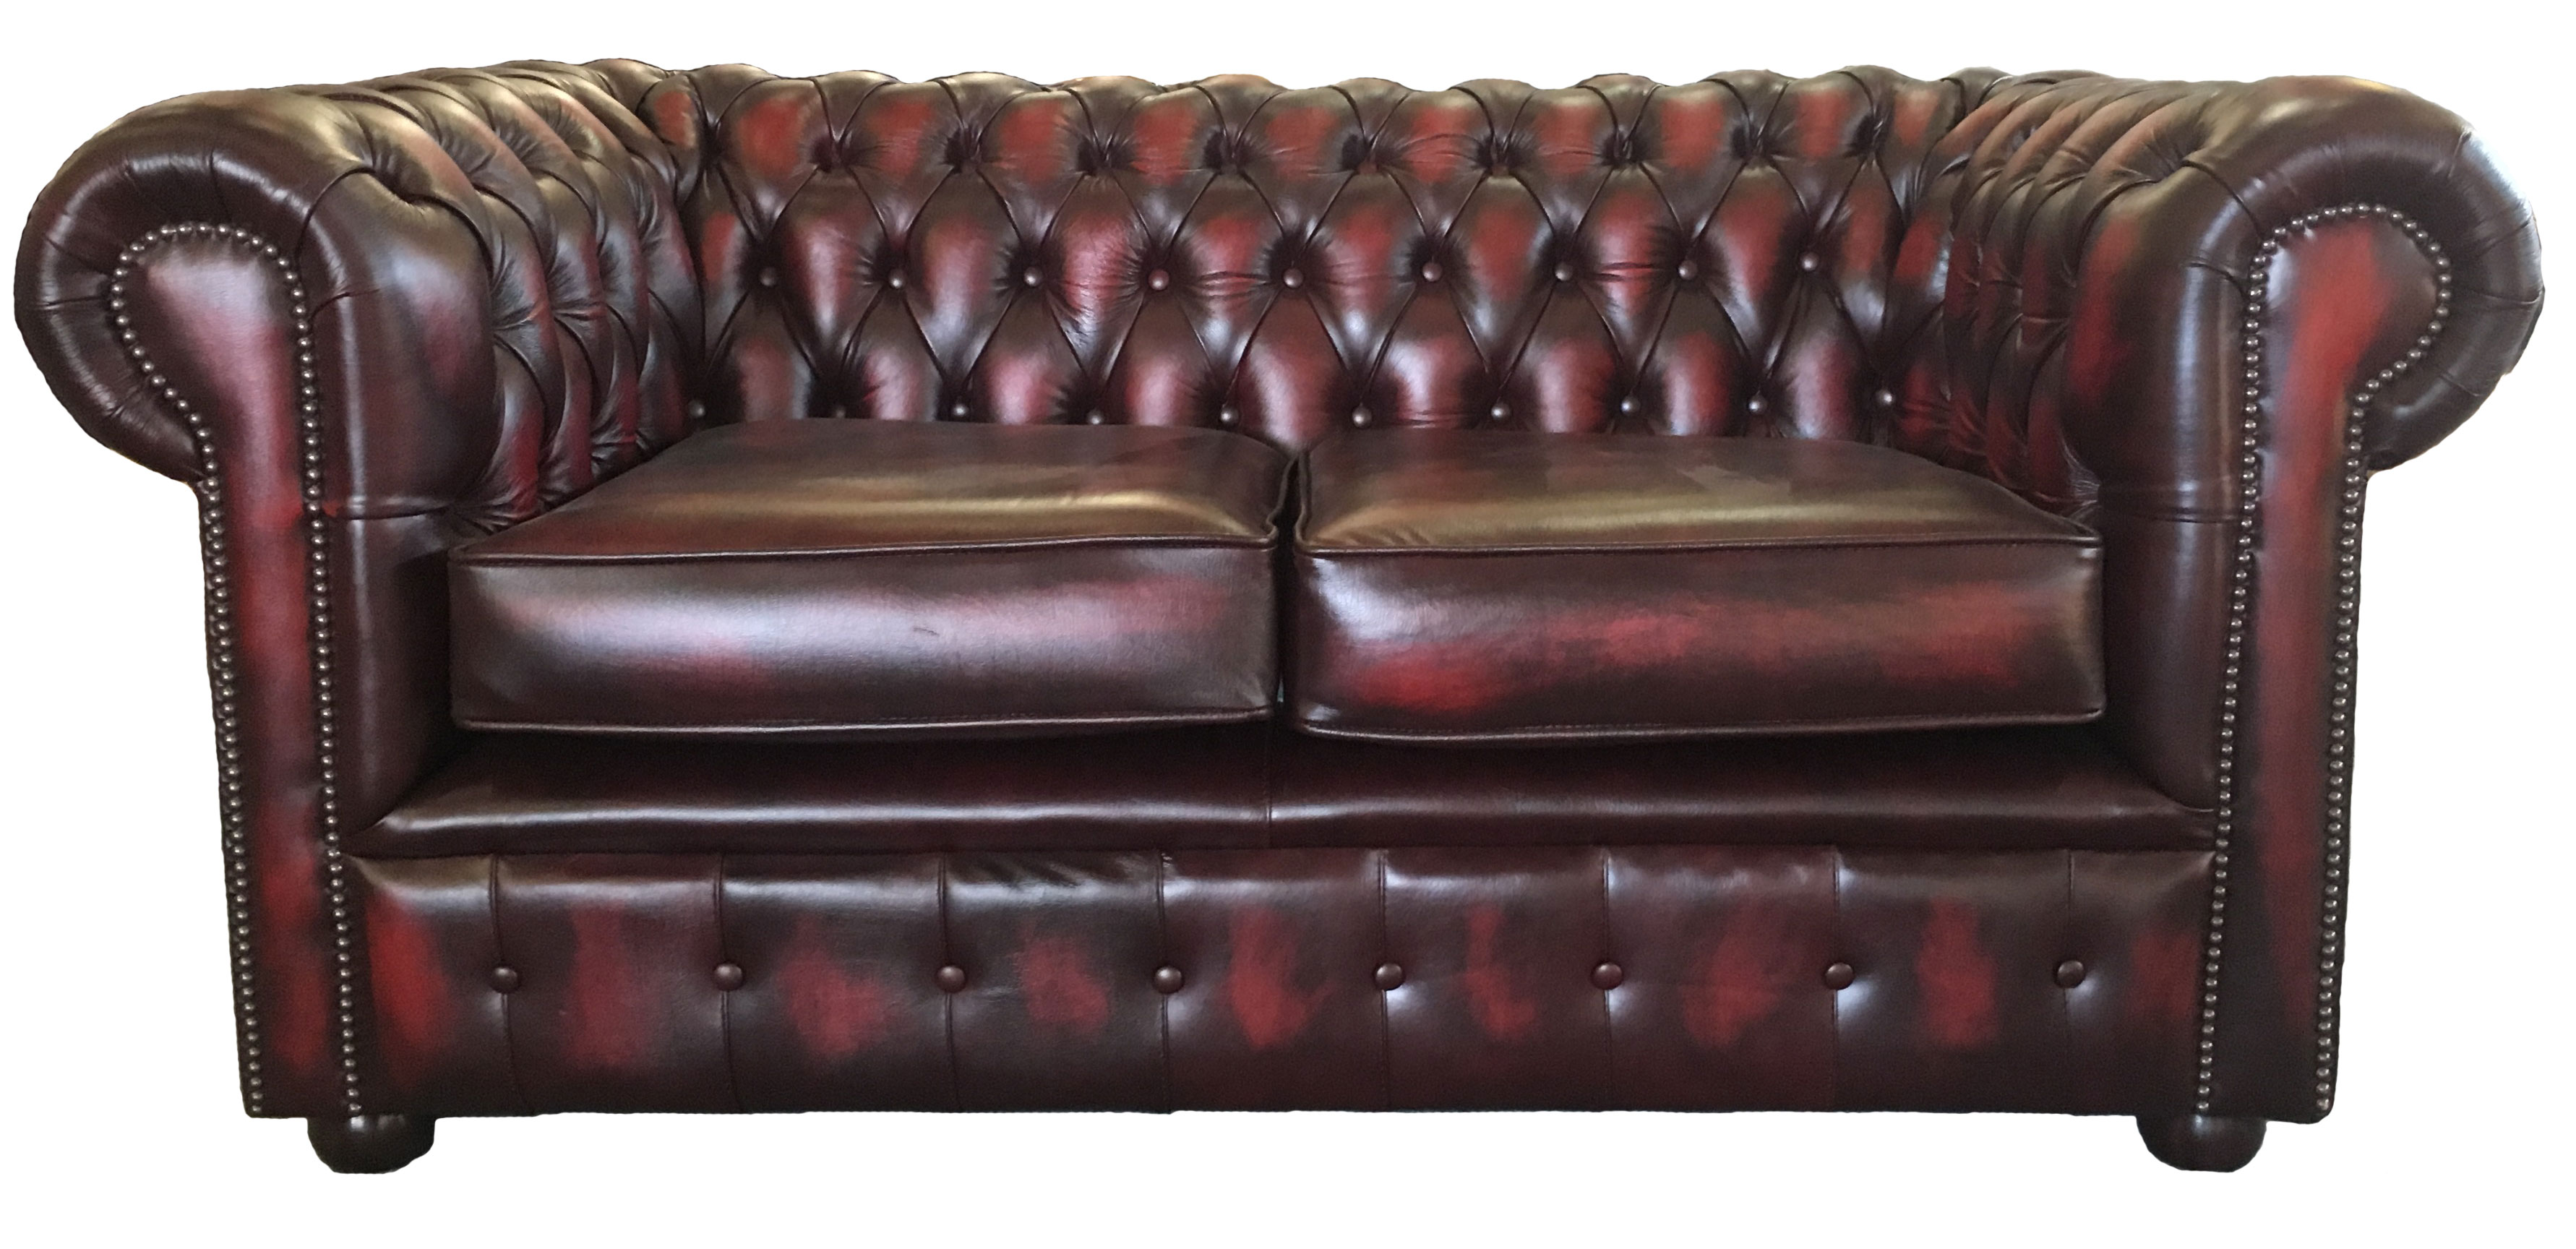 chesterfield leather sofa for sale ebay